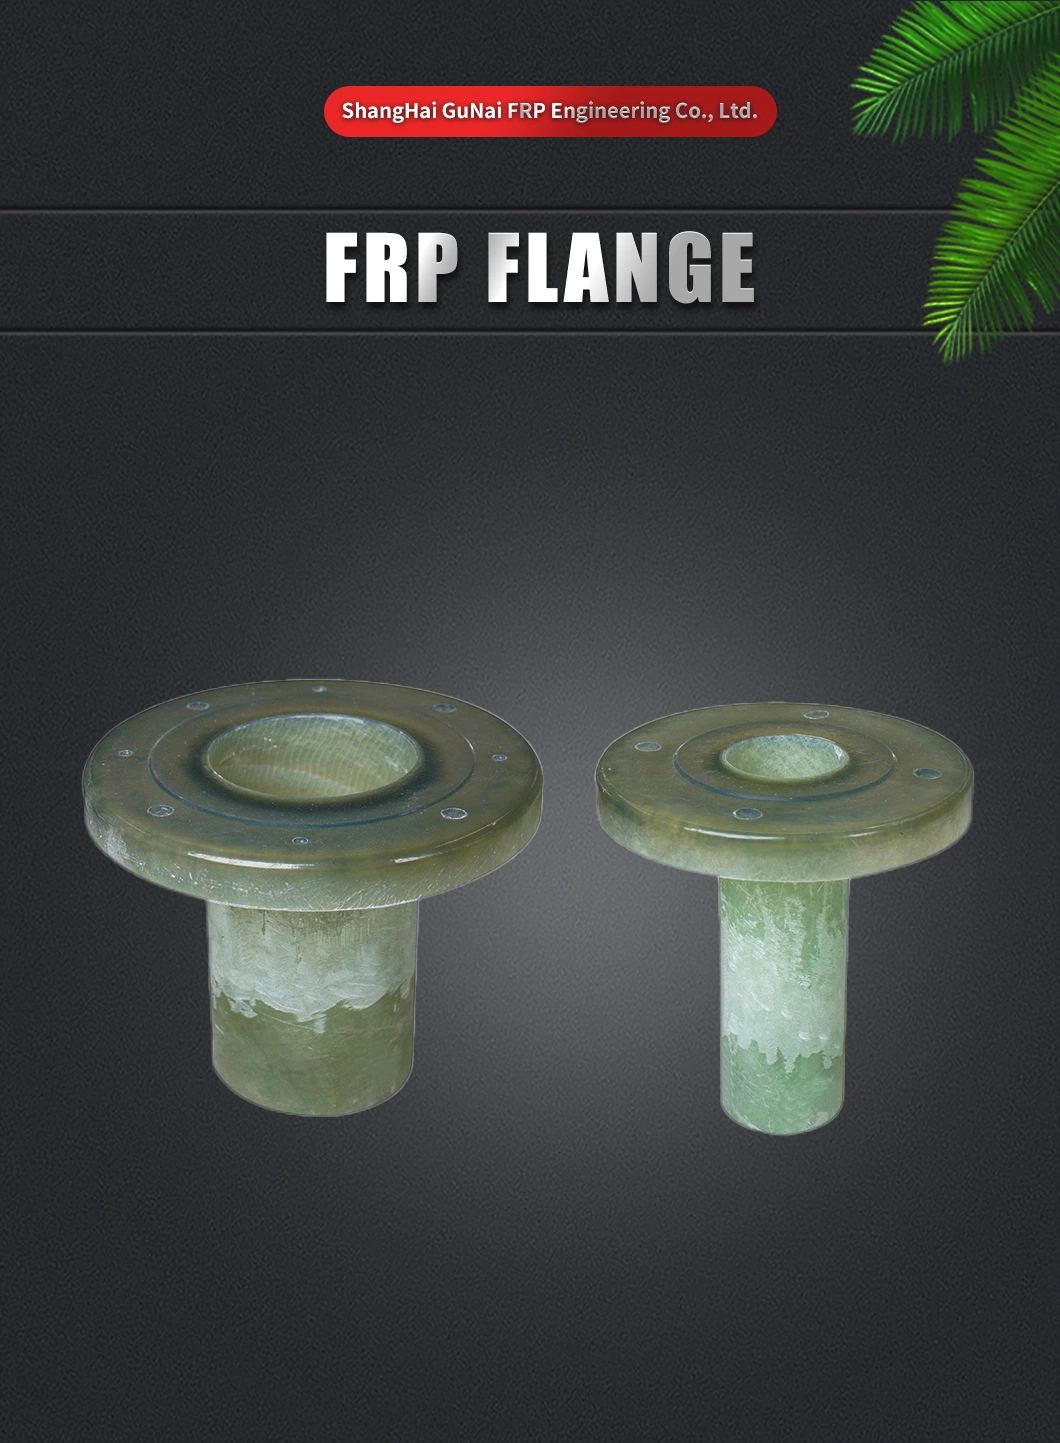 Space Saving FRP Flange for Compact Piping Solutions